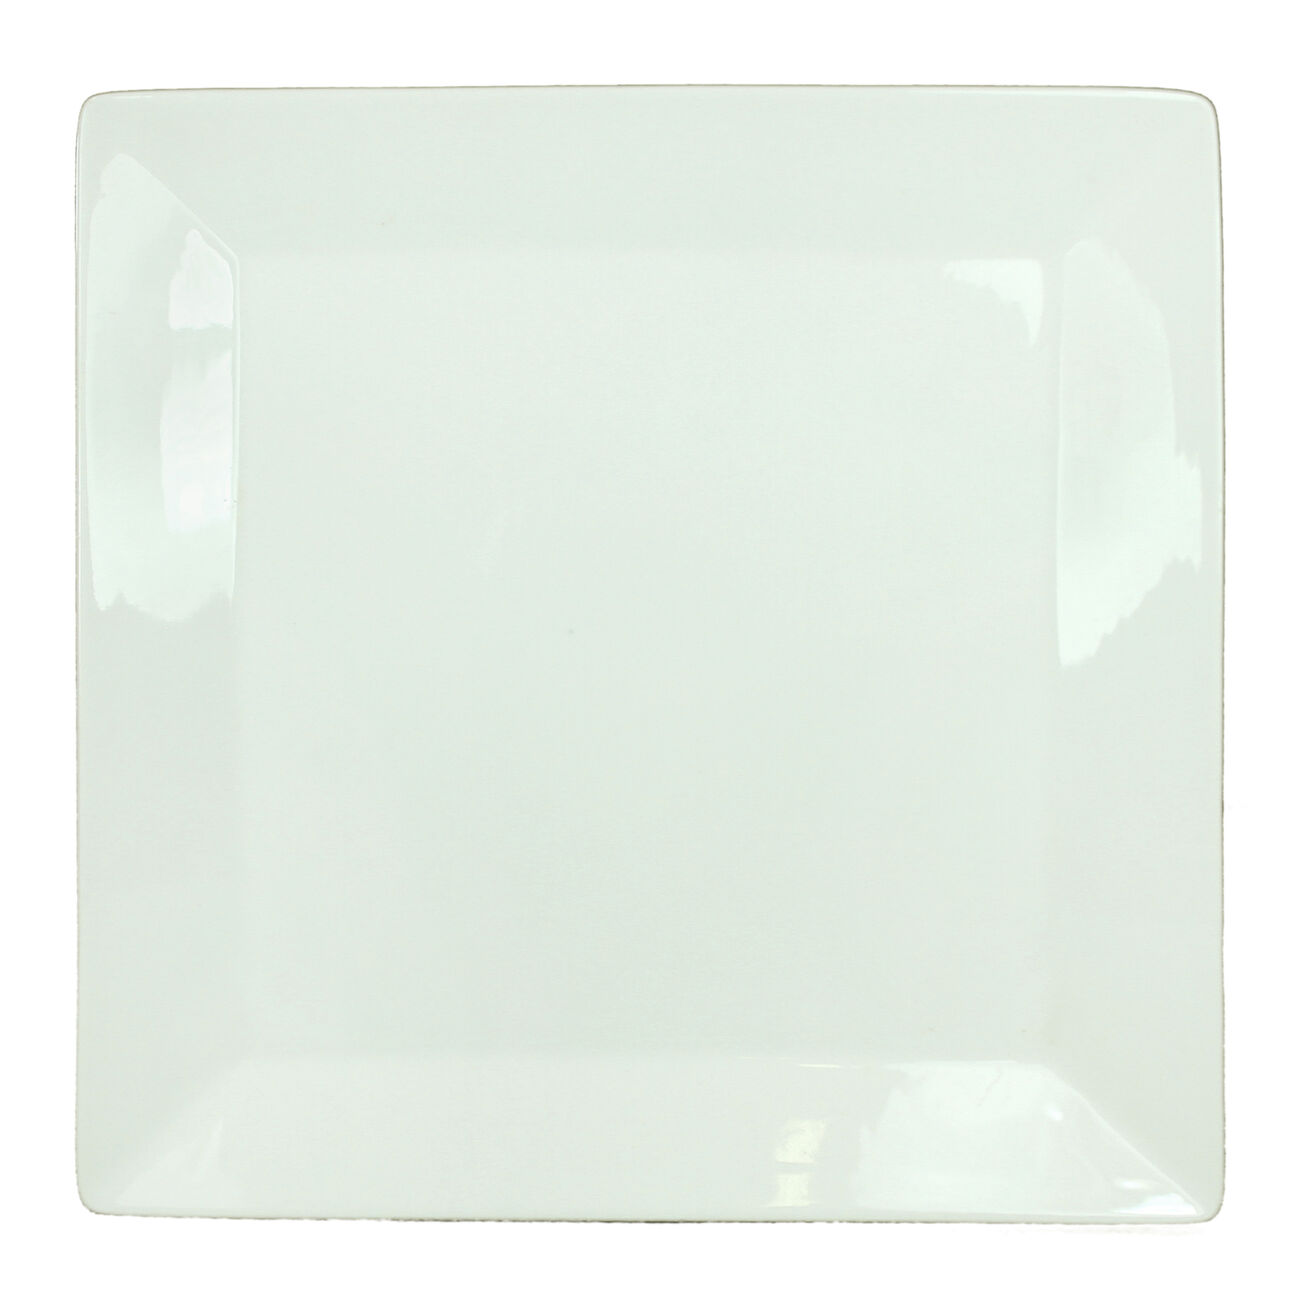 Uniquely Designed Square Shape Ceramic Plate with Curved Rims, Glossy White